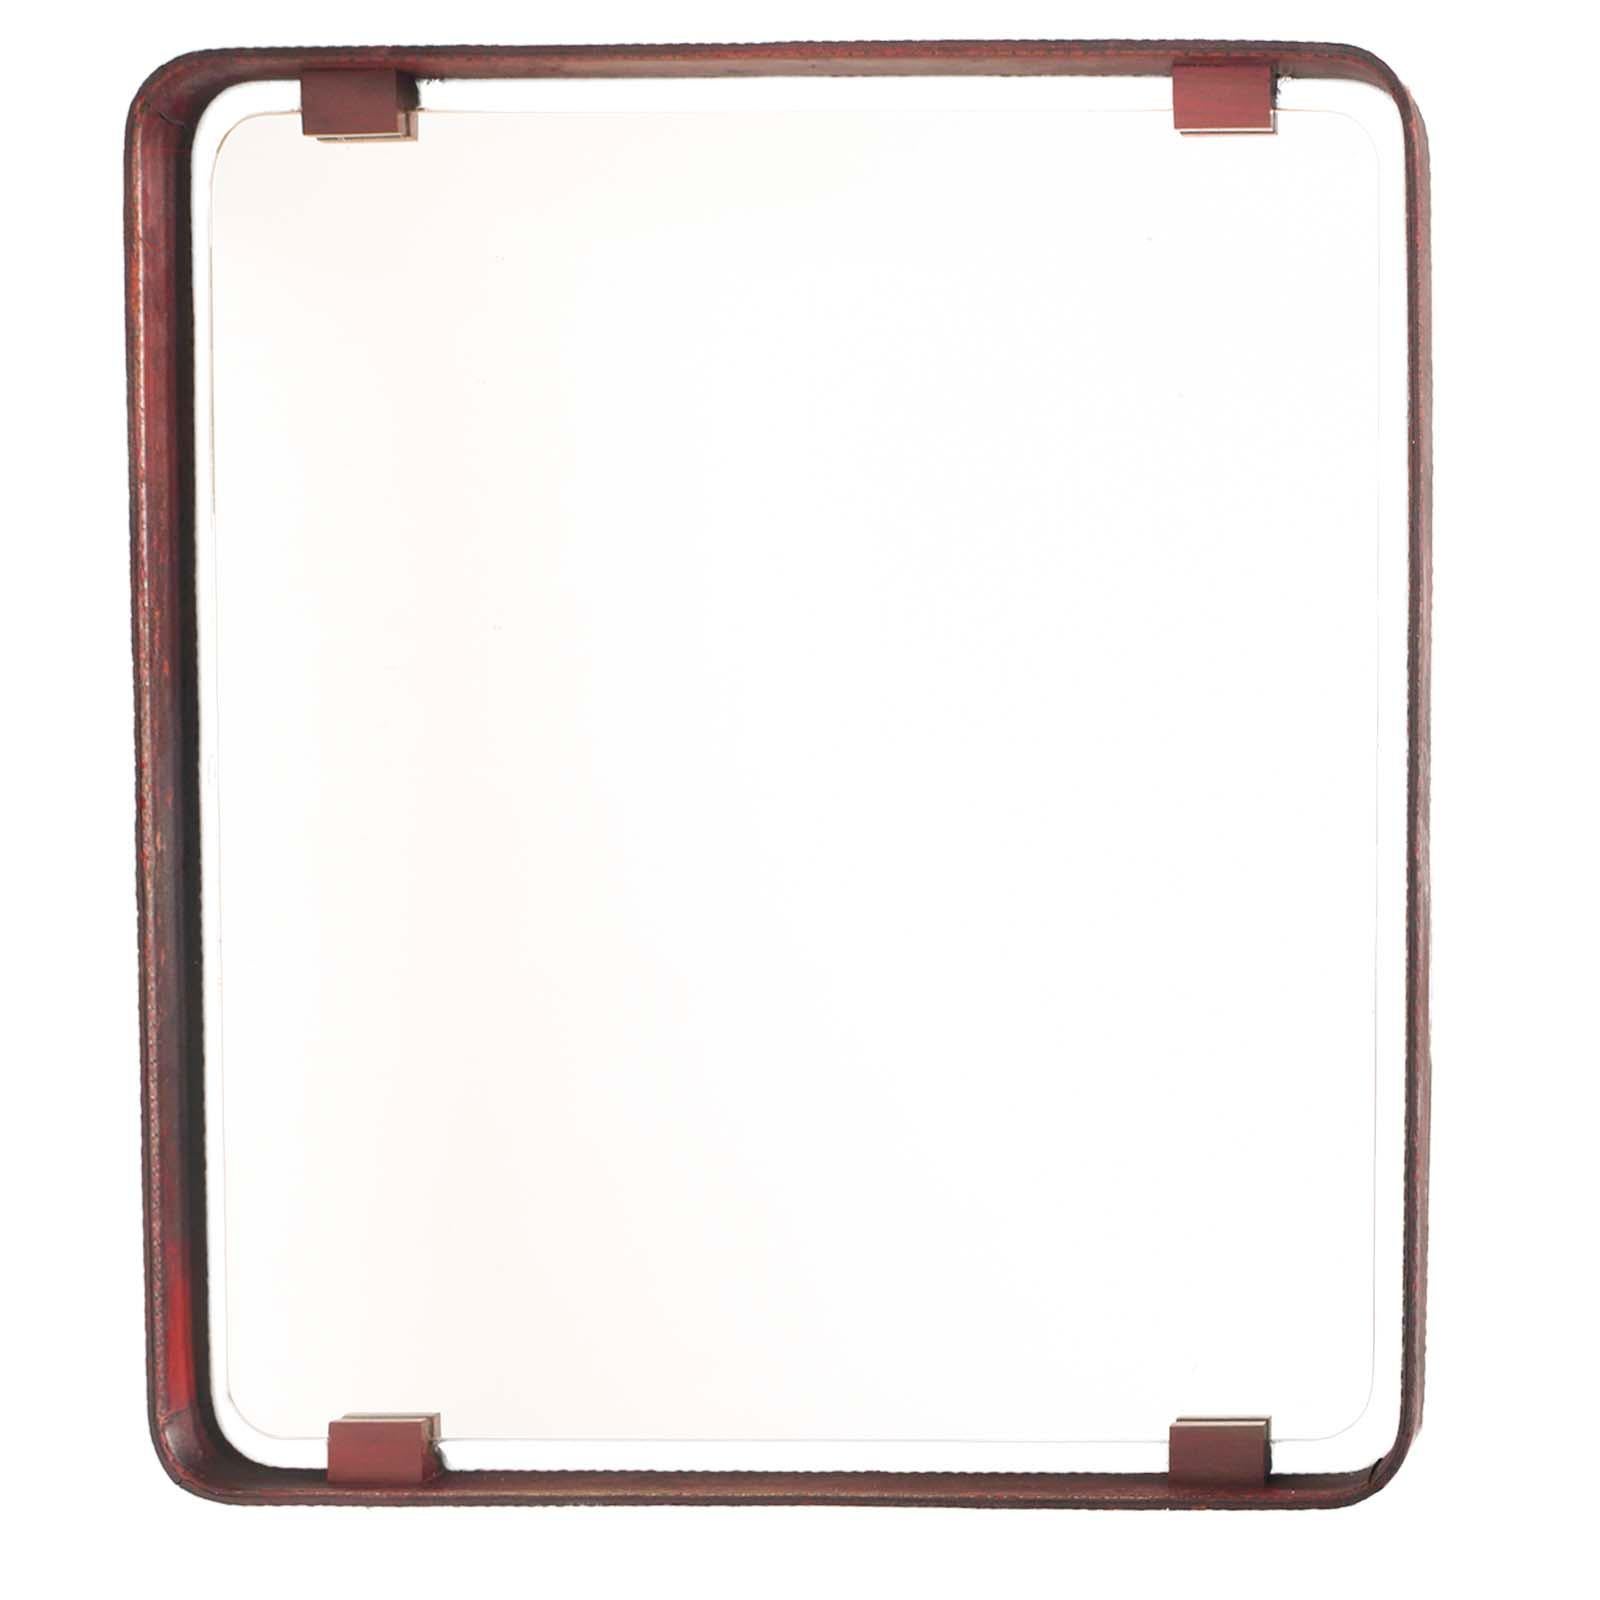 20th Century 1950s Mirror, Steel Frame with Leather, Fontanit Branded Glass, by Fontana Arte